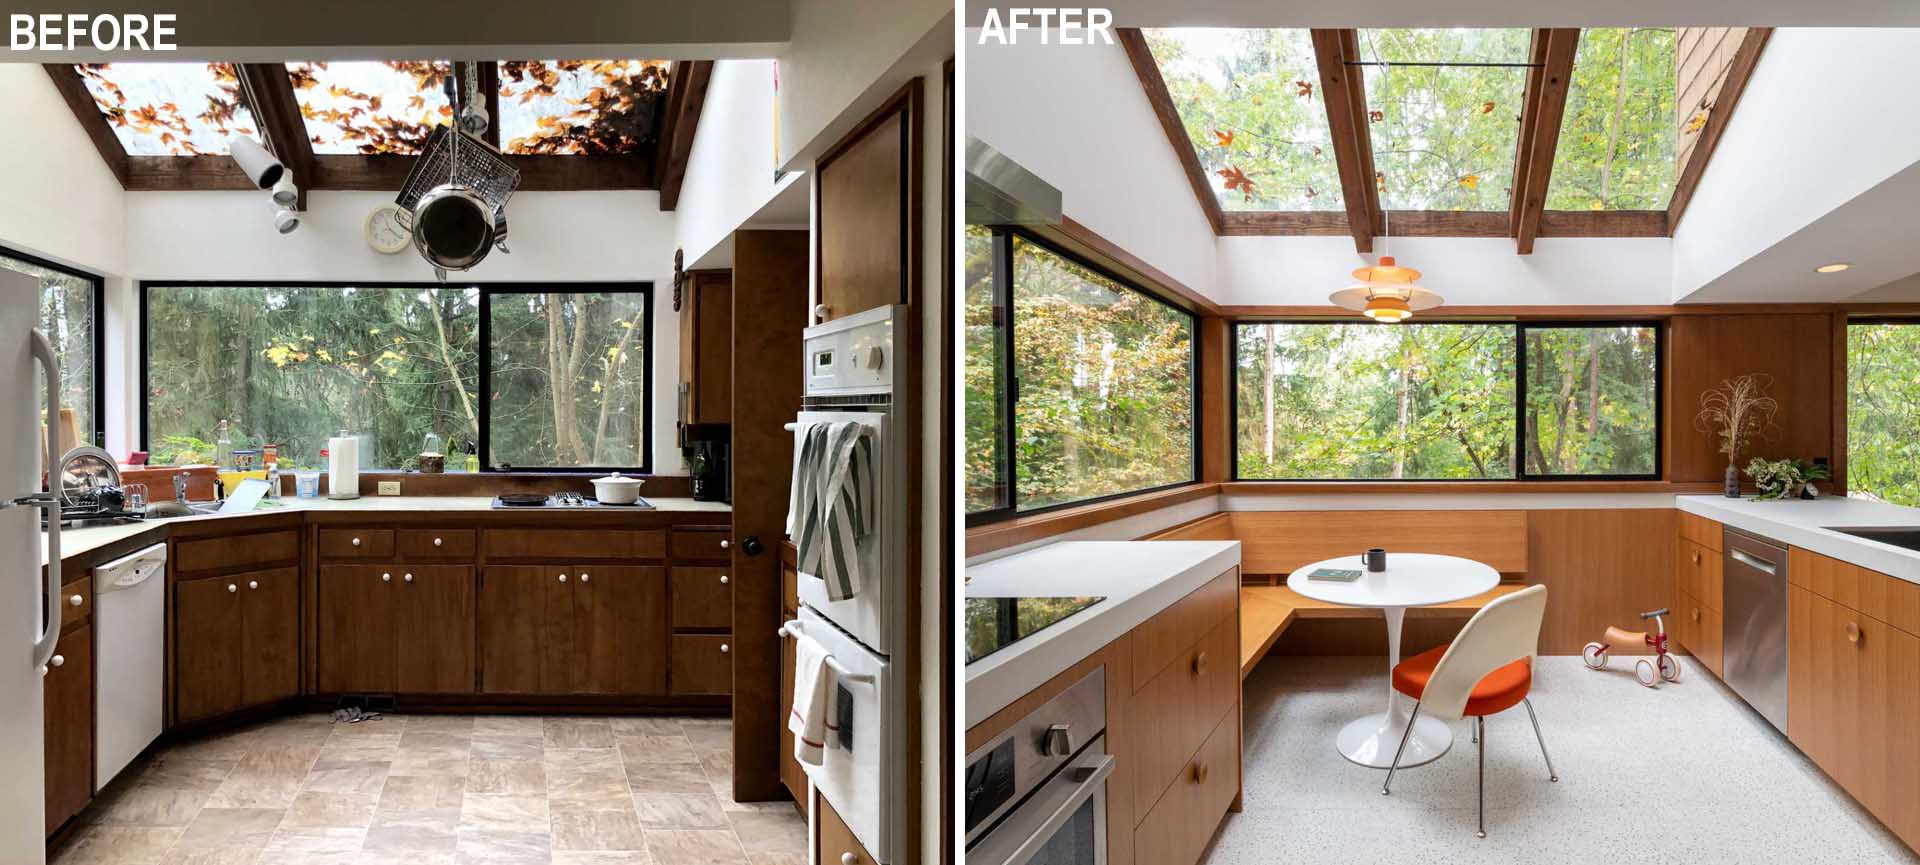 A remodeled kitchen that originally had dark wood cabinets, and now has light wood cabinets and a built-in corner breakfast nook.